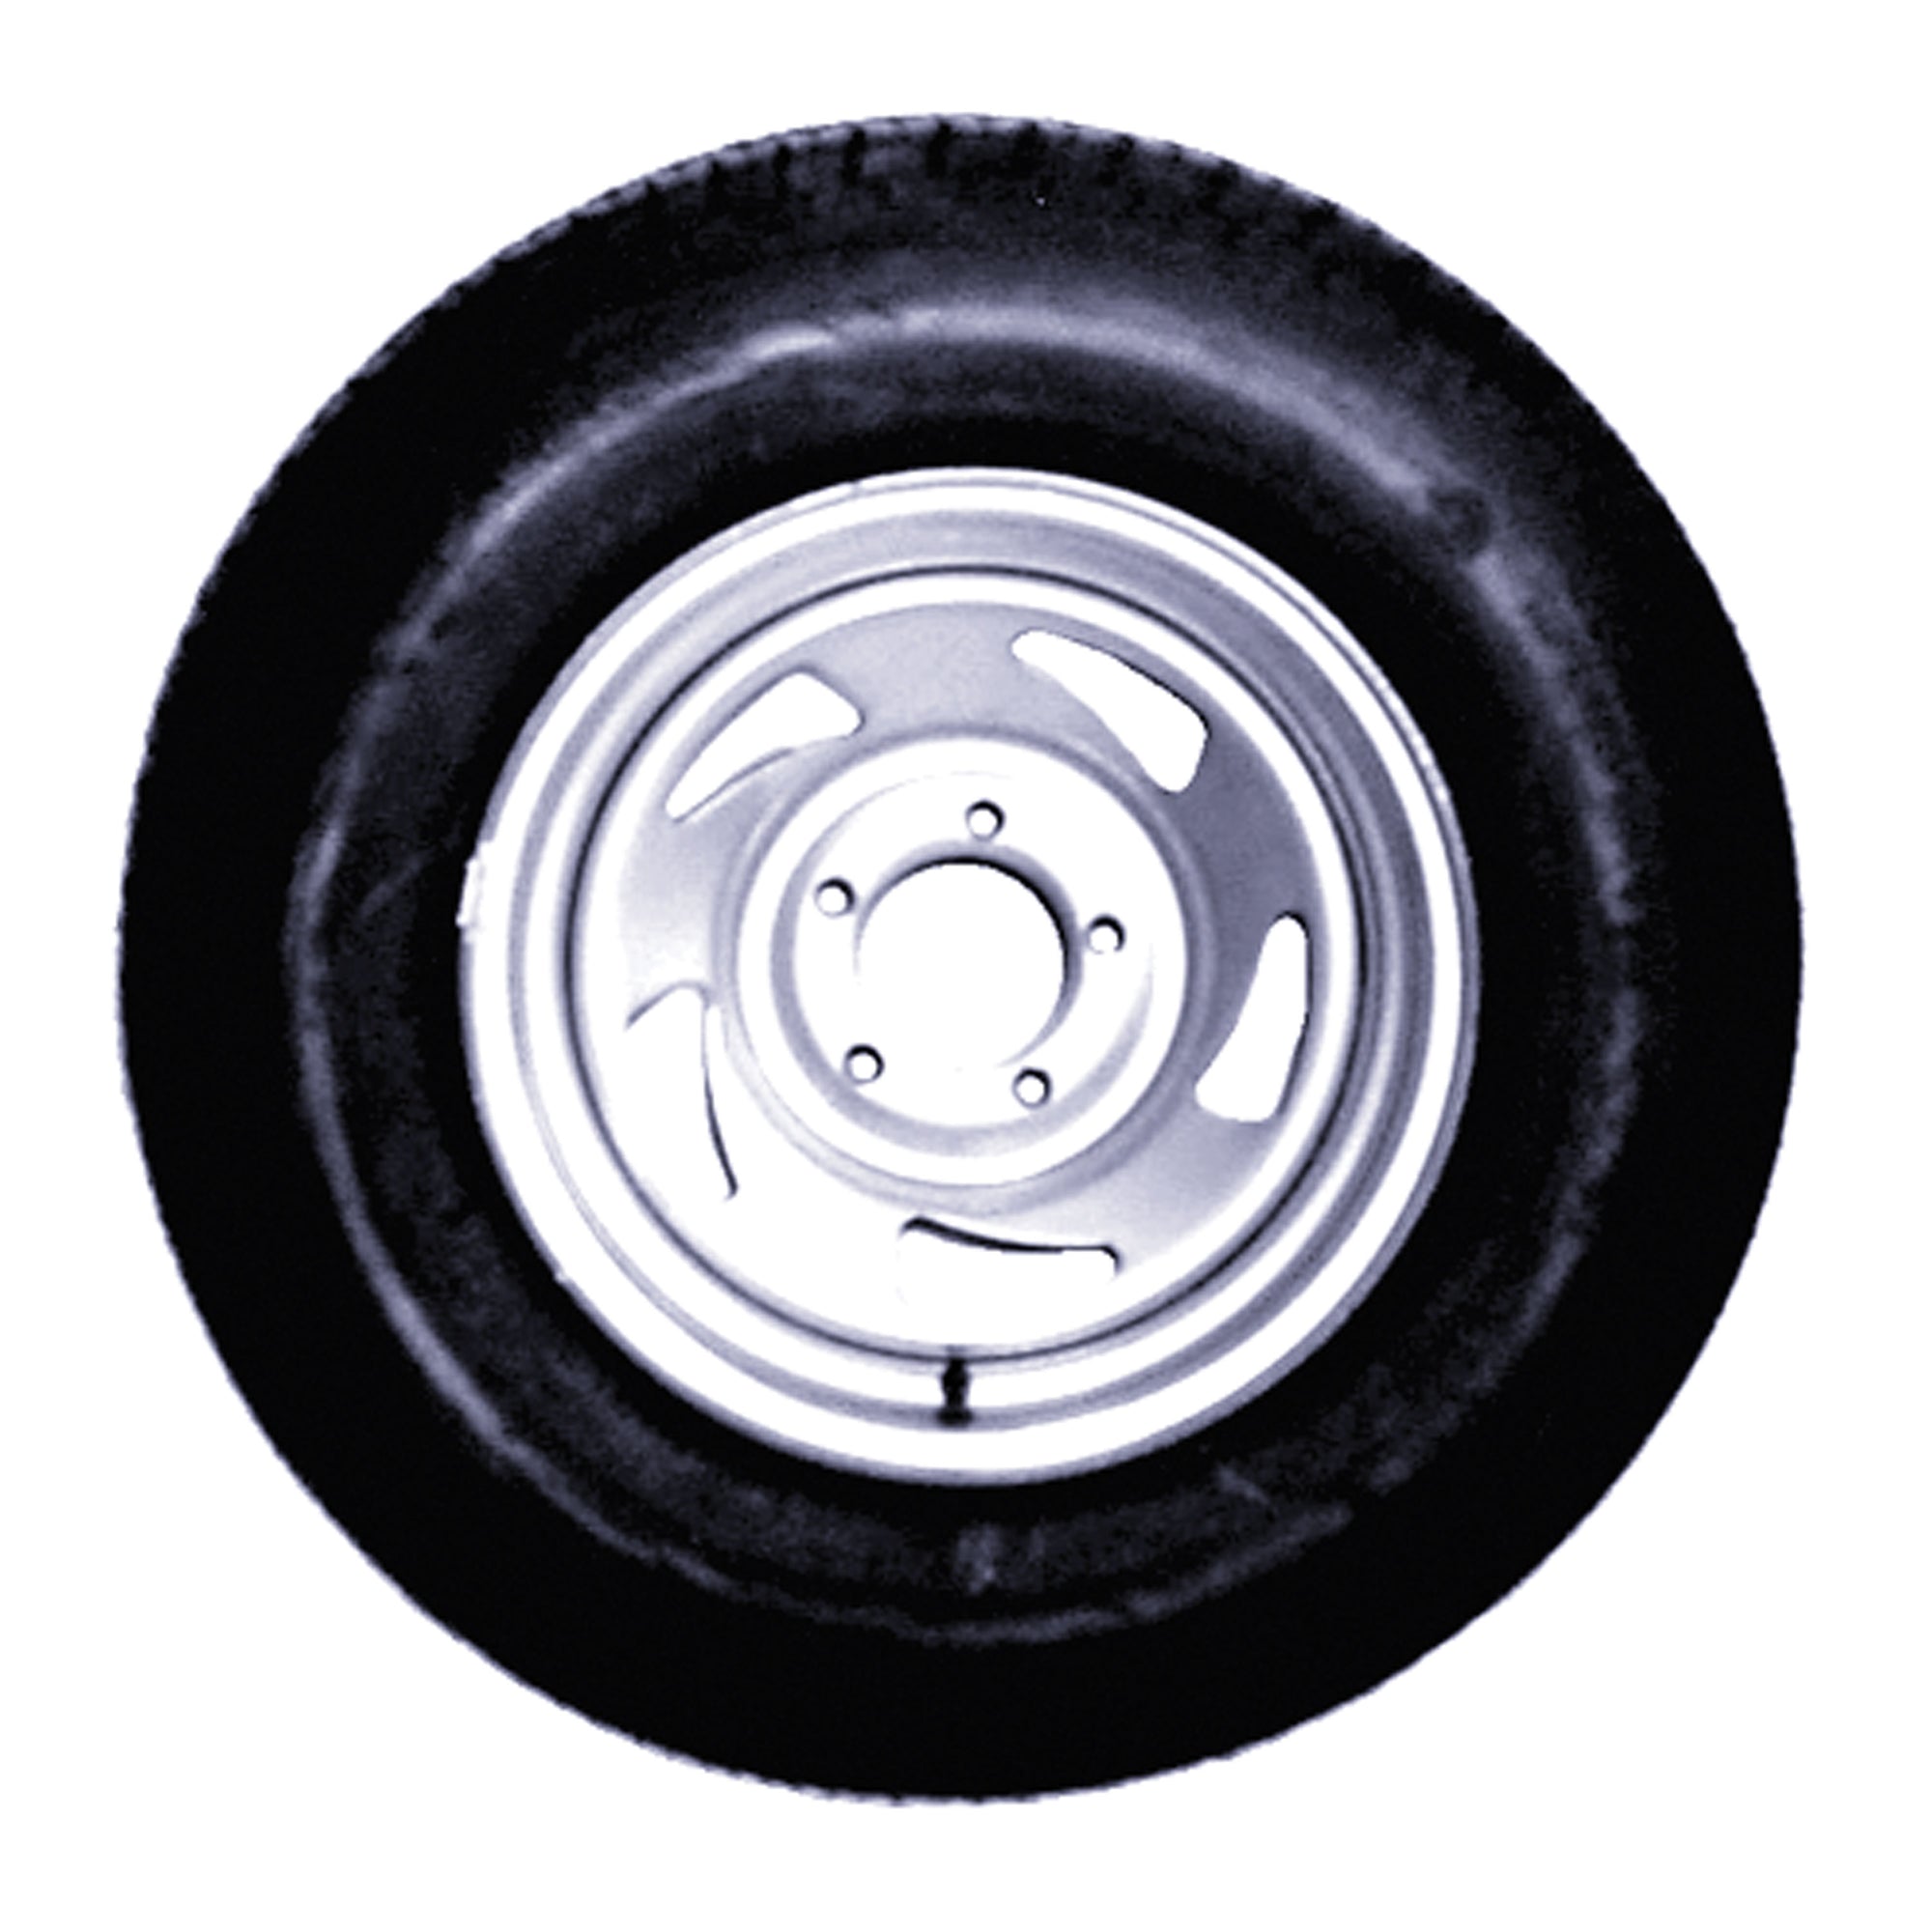 Americana Tire and Wheel 32386 Economy Radial Tire and Wheel ST205/75R15 C/5-Hole - Painted Silver Directional Rim